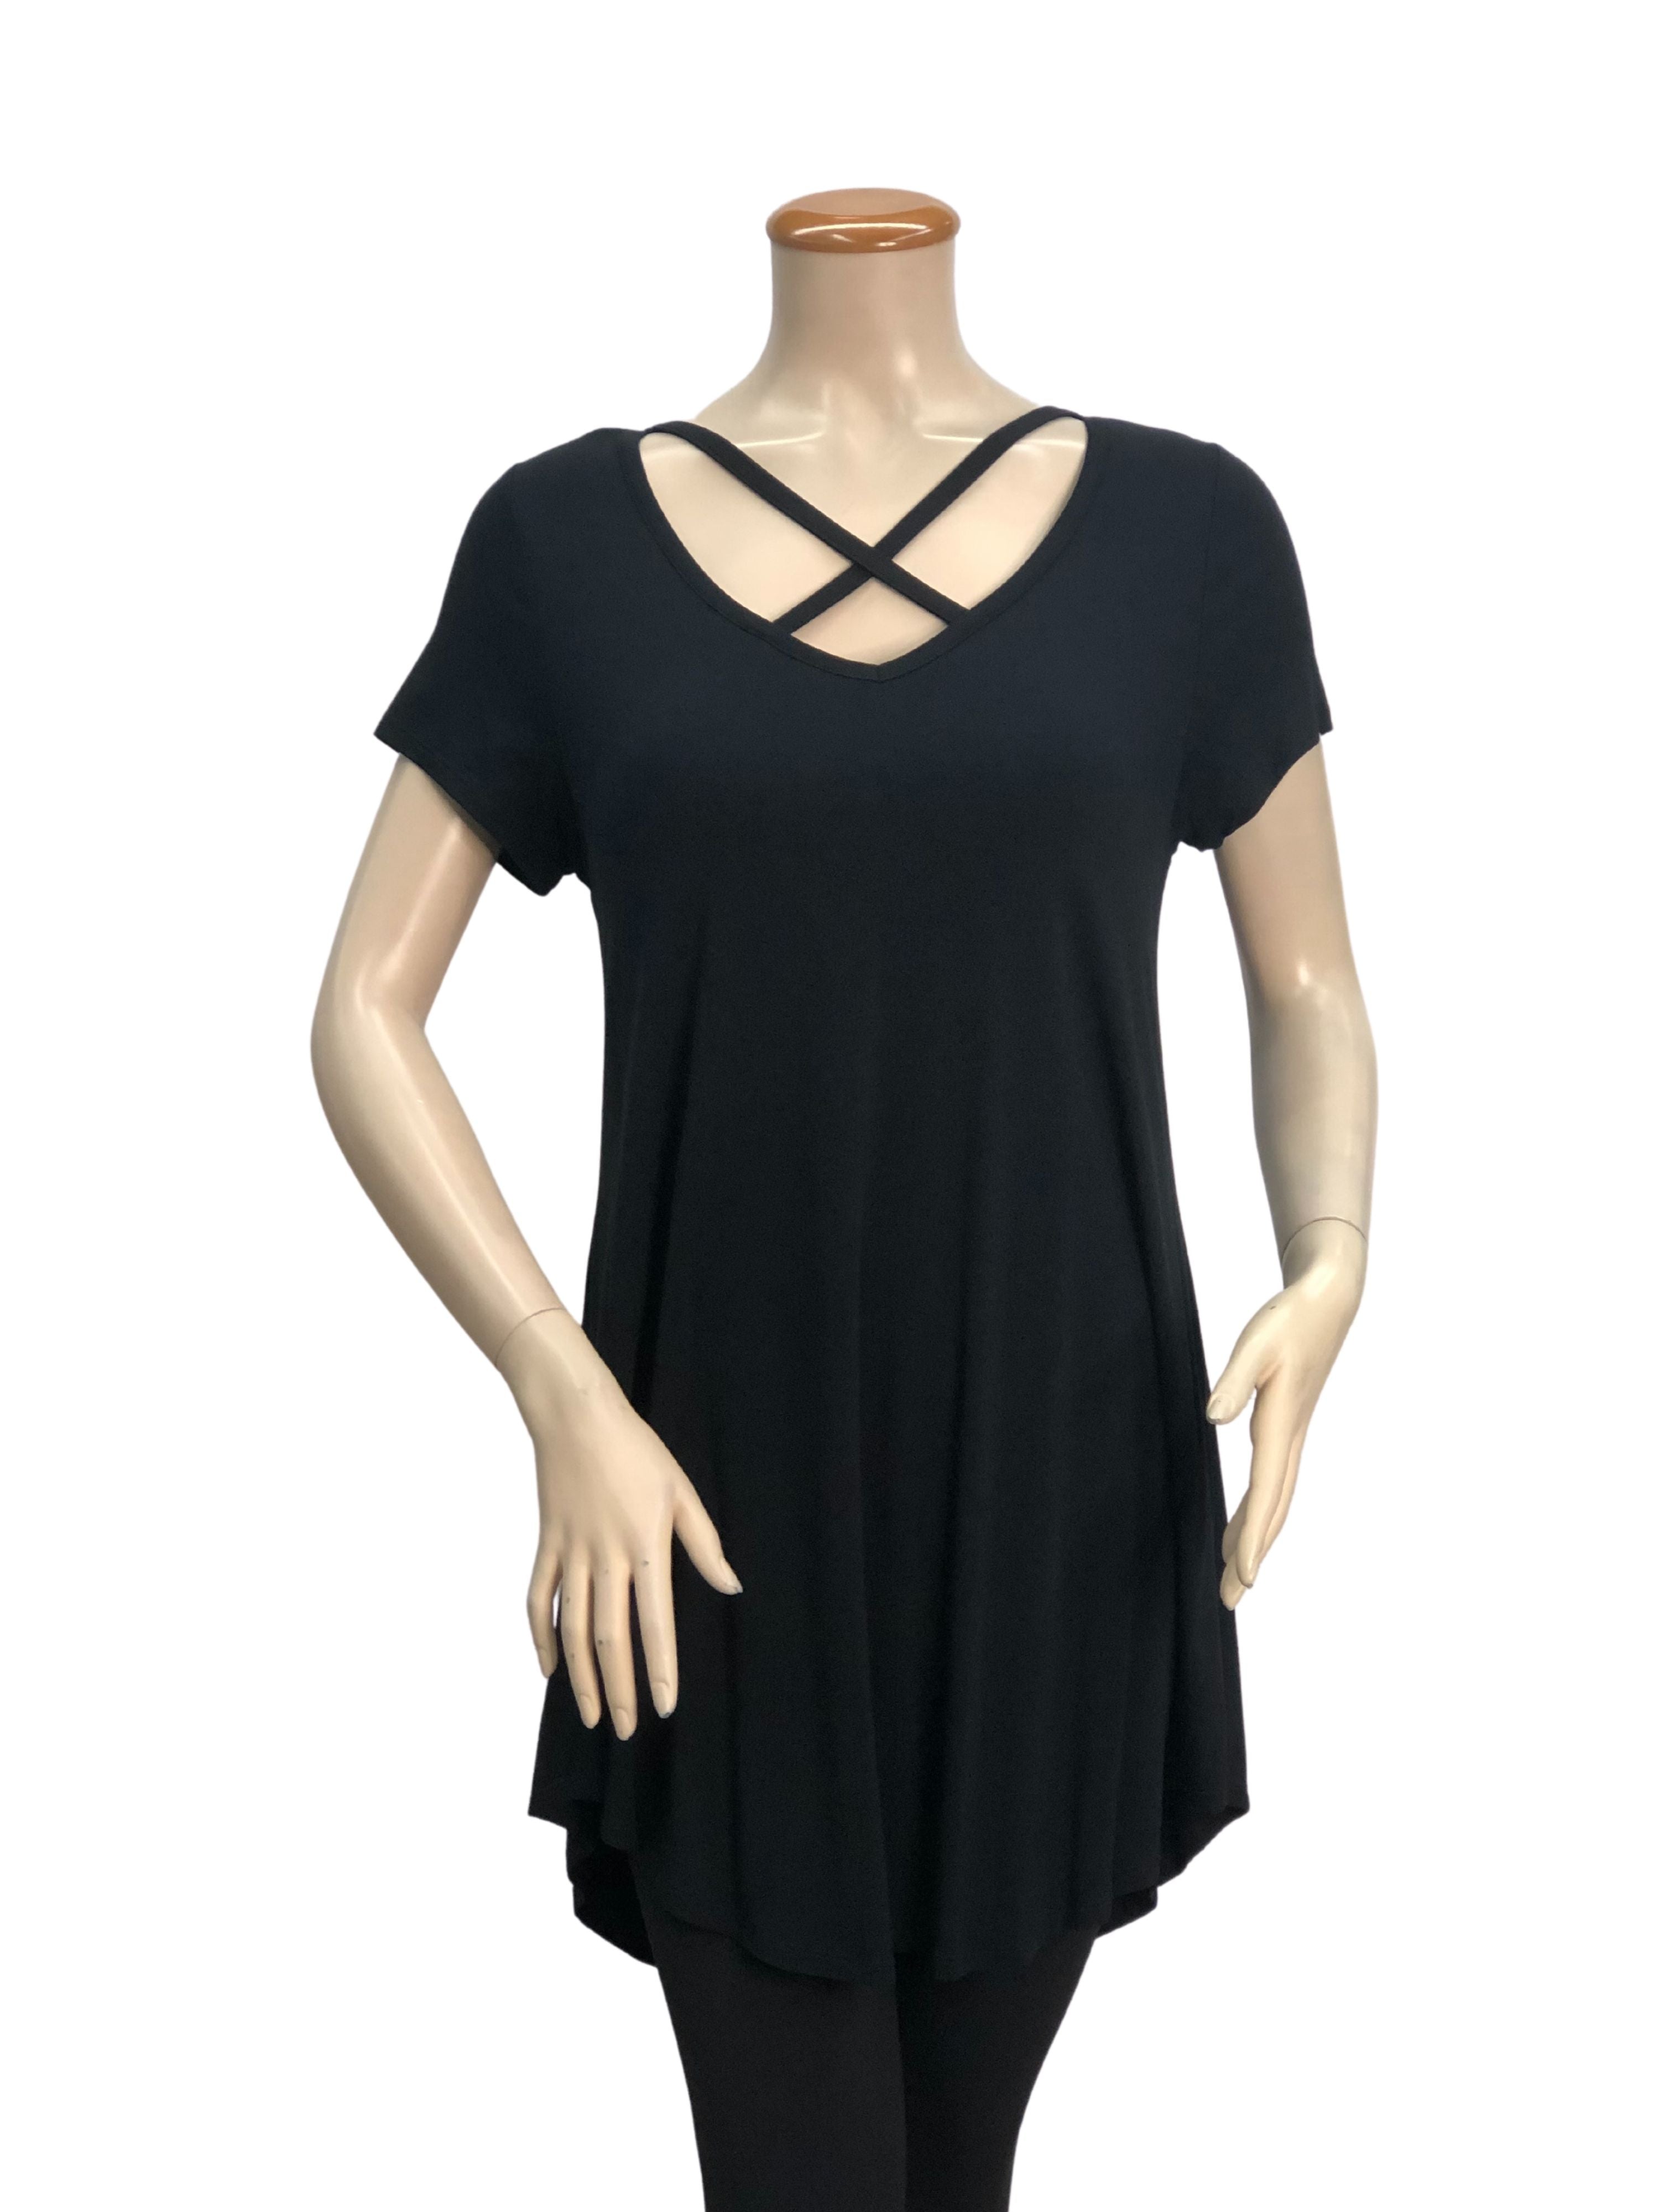 FASHQUE - Criss Cross Front Short Sleeve Tunic Top - S#1604M